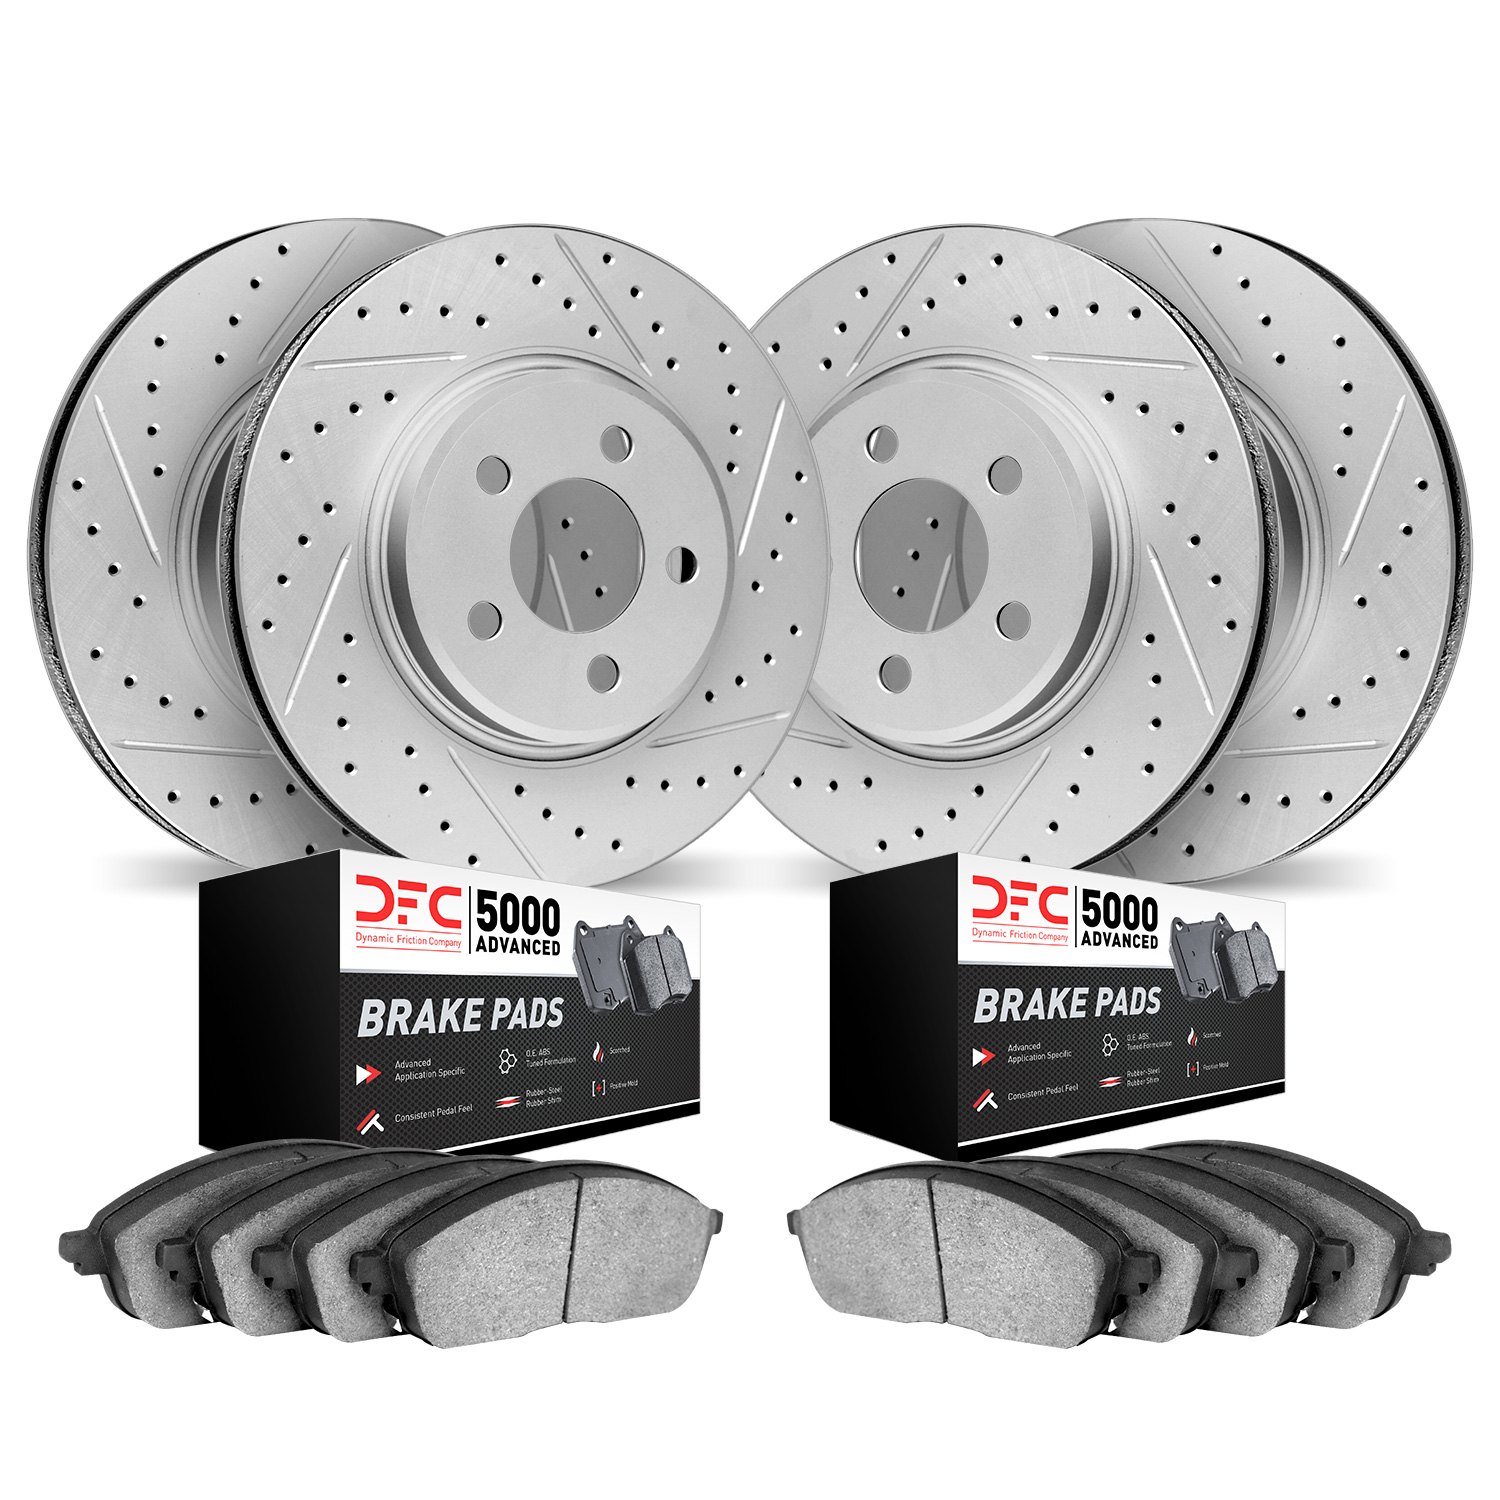 2504-63004 Geoperformance Drilled/Slotted Rotors w/5000 Advanced Brake Pads Kit, 2018-2019 Mercedes-Benz, Position: Front and Re